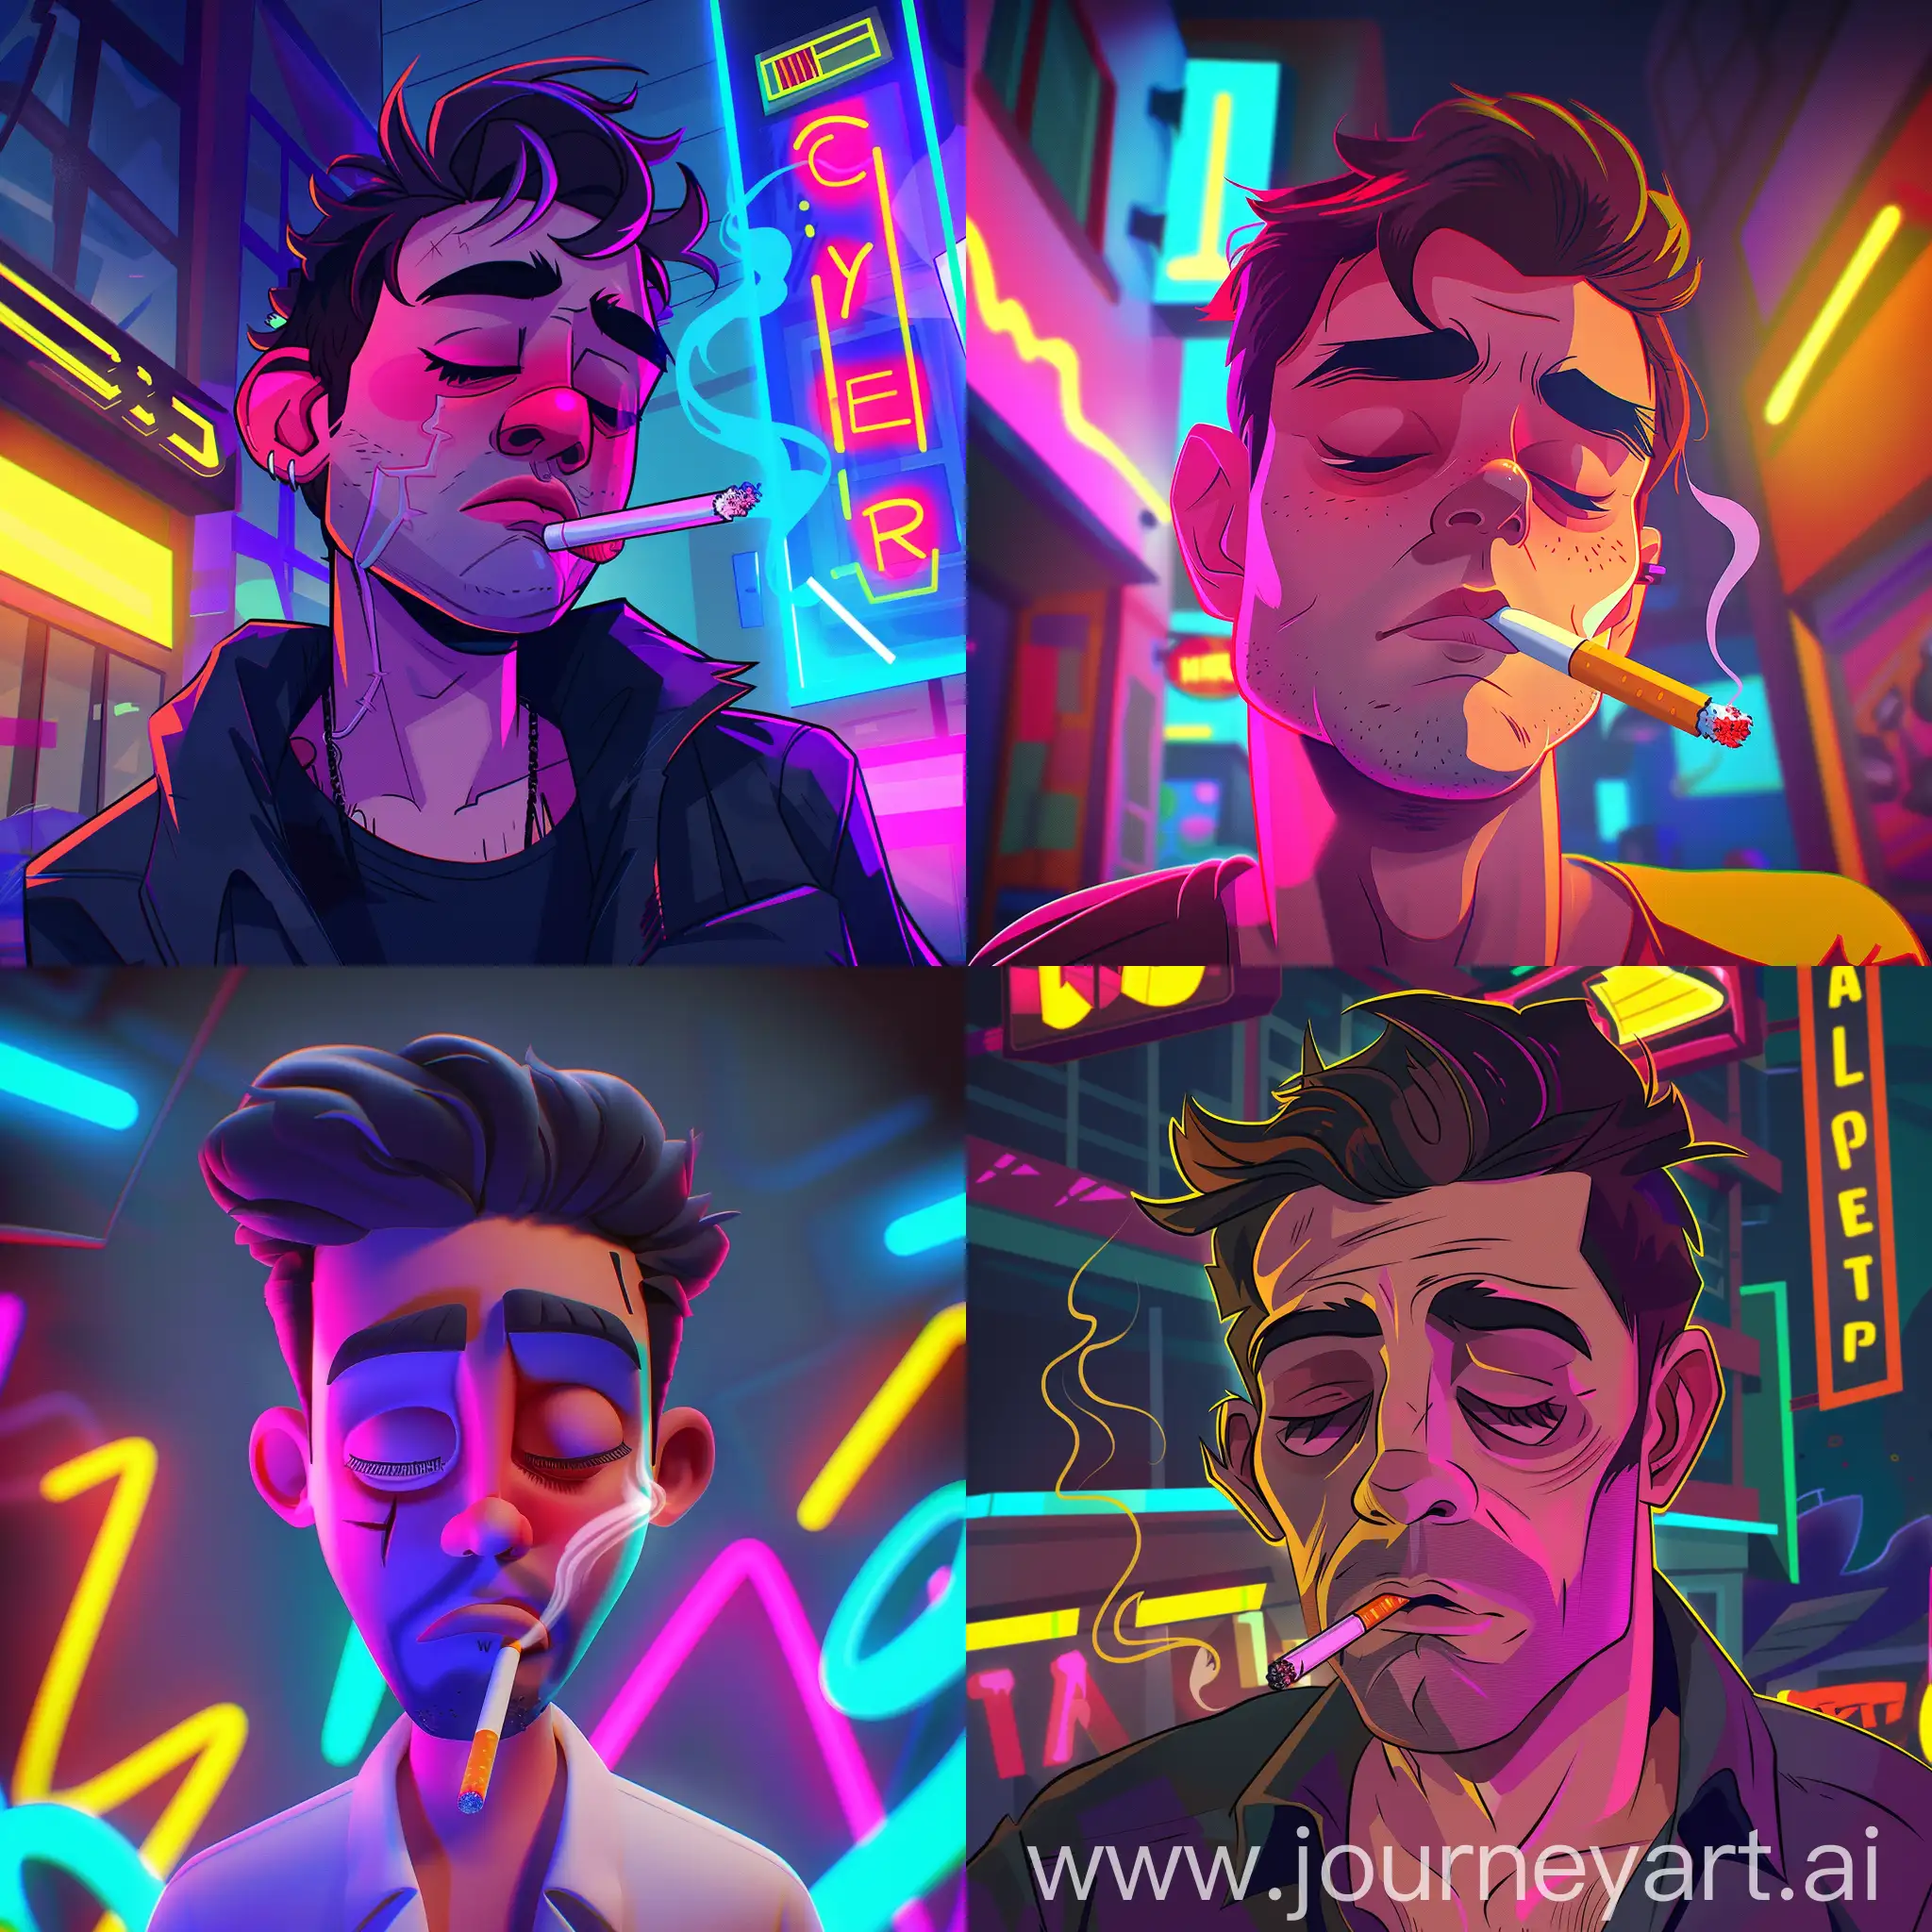 Exhausted-Cartoon-Character-Smoking-a-Cigarette-Under-Neon-Lights